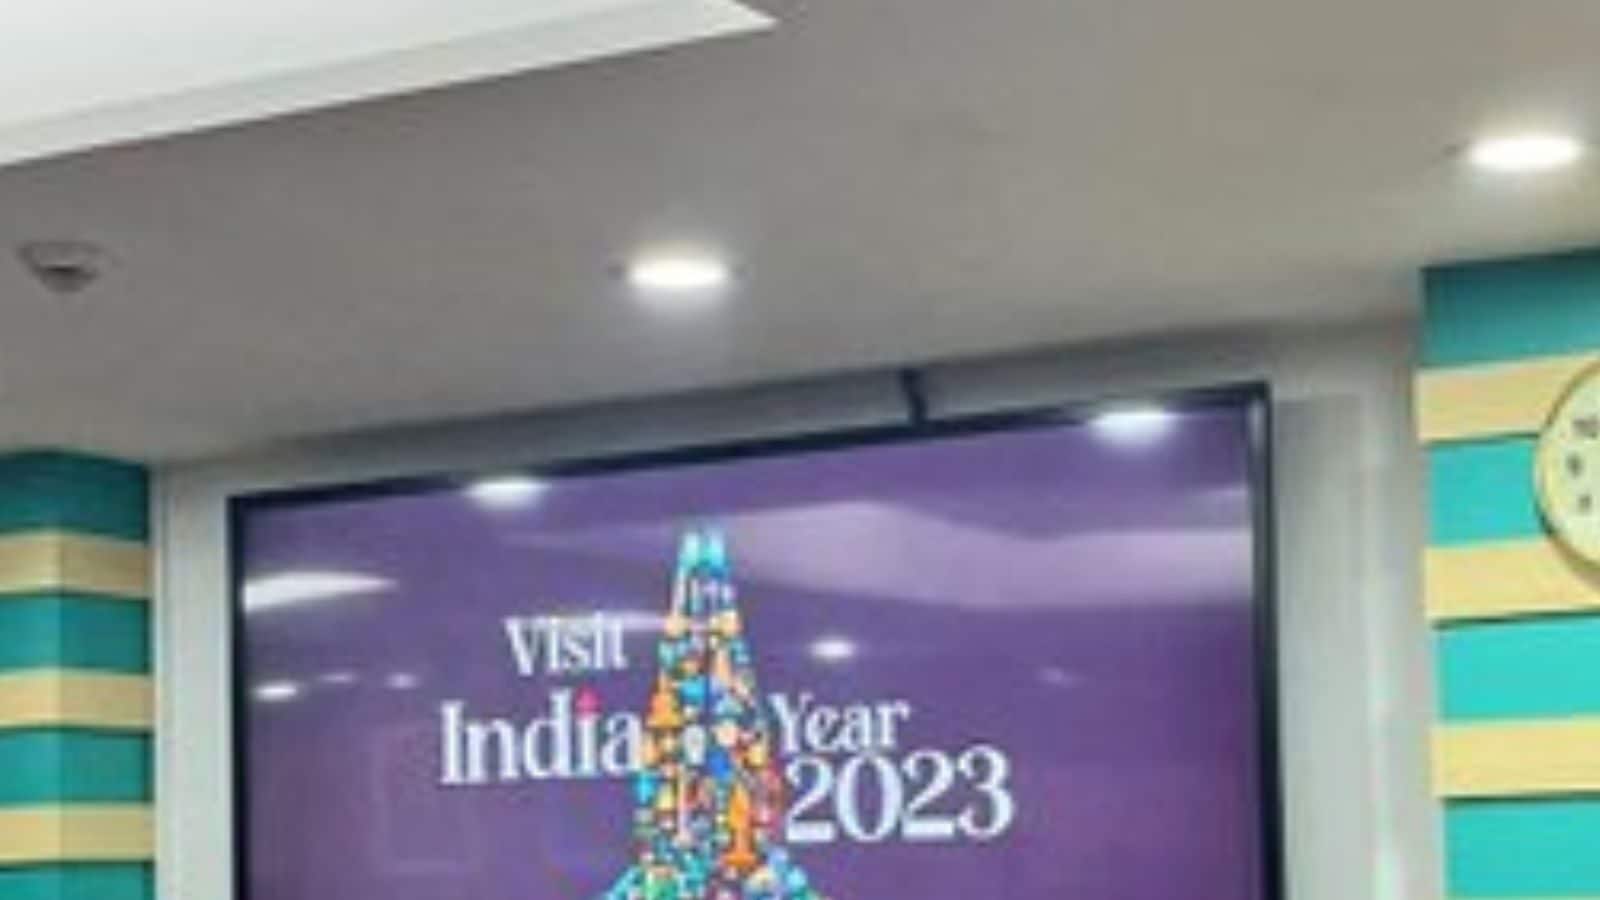 Tourism Minister Launches Visit India Year 2023 Campaign, Logo; Invites World to See the Country